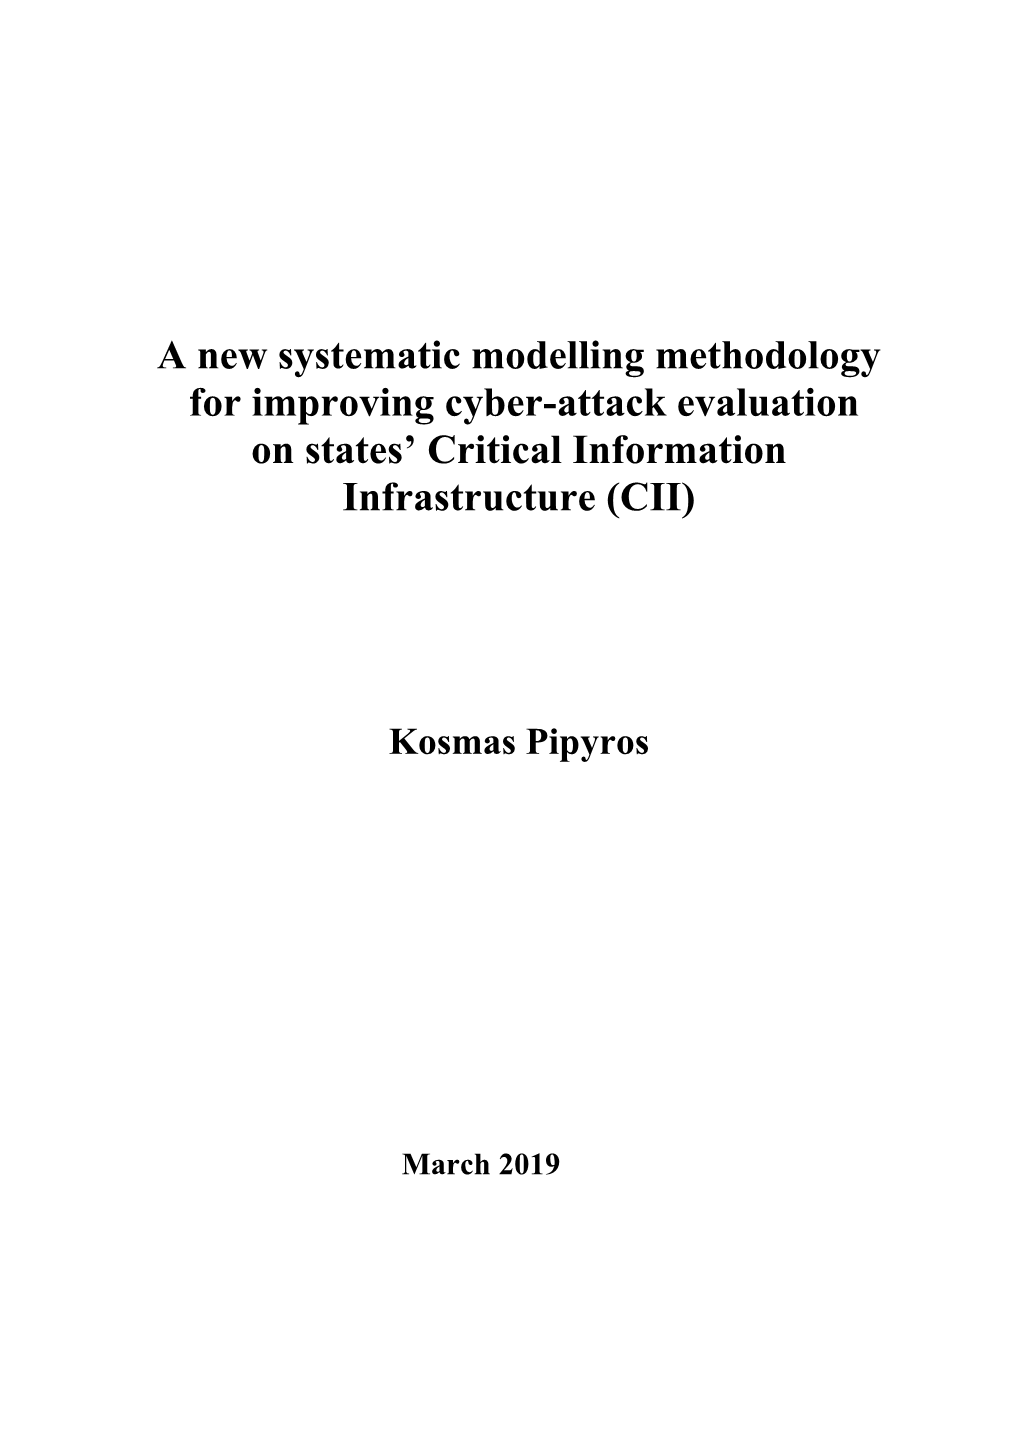 A New Systematic Modelling Methodology for Improving Cyber-Attack Evaluation on States' Critical Information Infrastructure (C